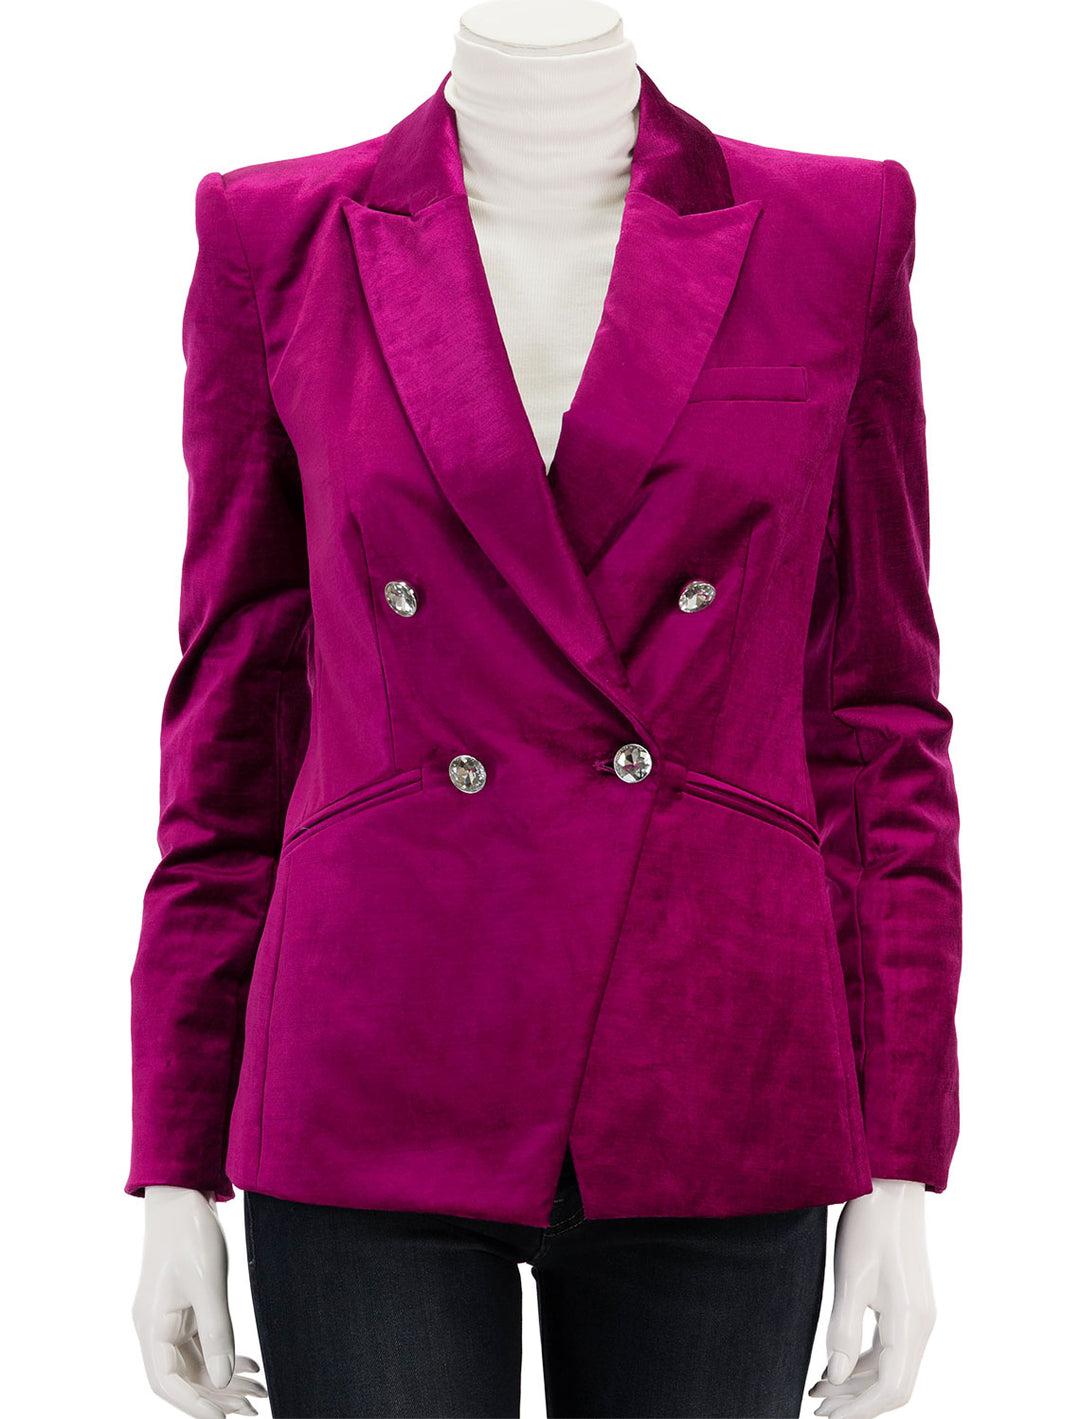 Front view of Veronica Beard's elam dickey jacket, buttoned.